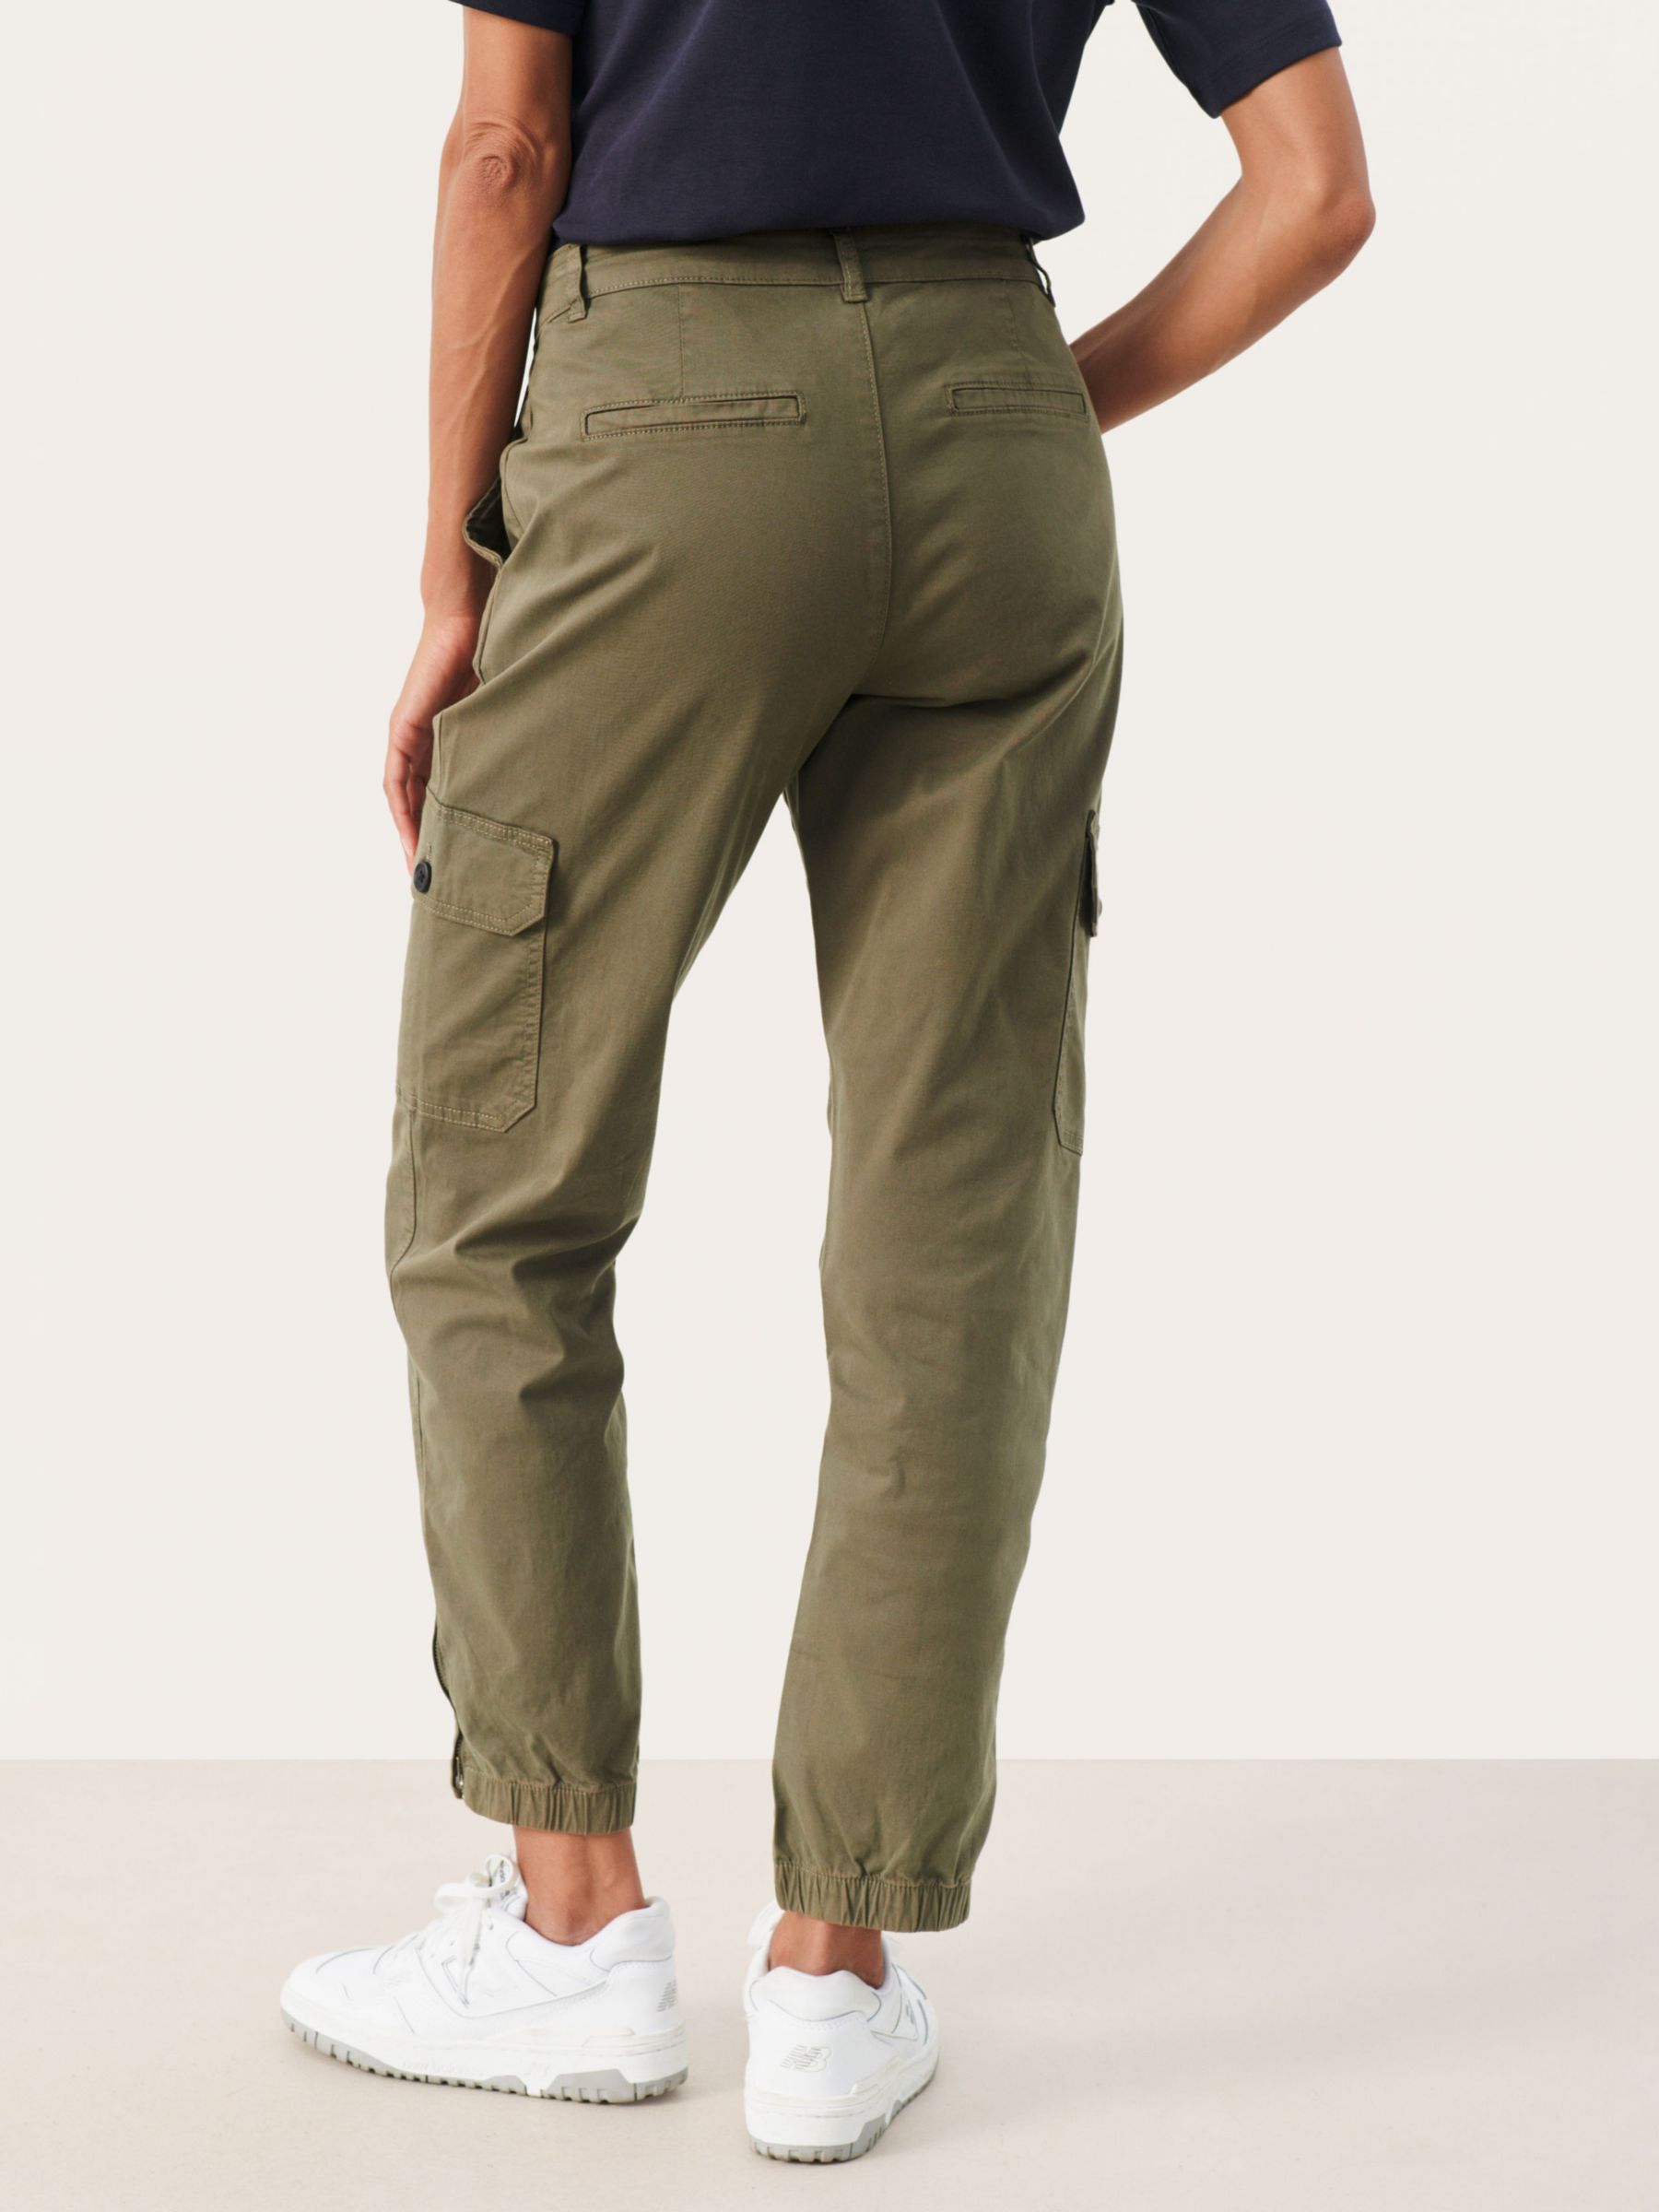 Buy Khaki Green Maternity Utility Cargo Trousers from the Next UK online  shop